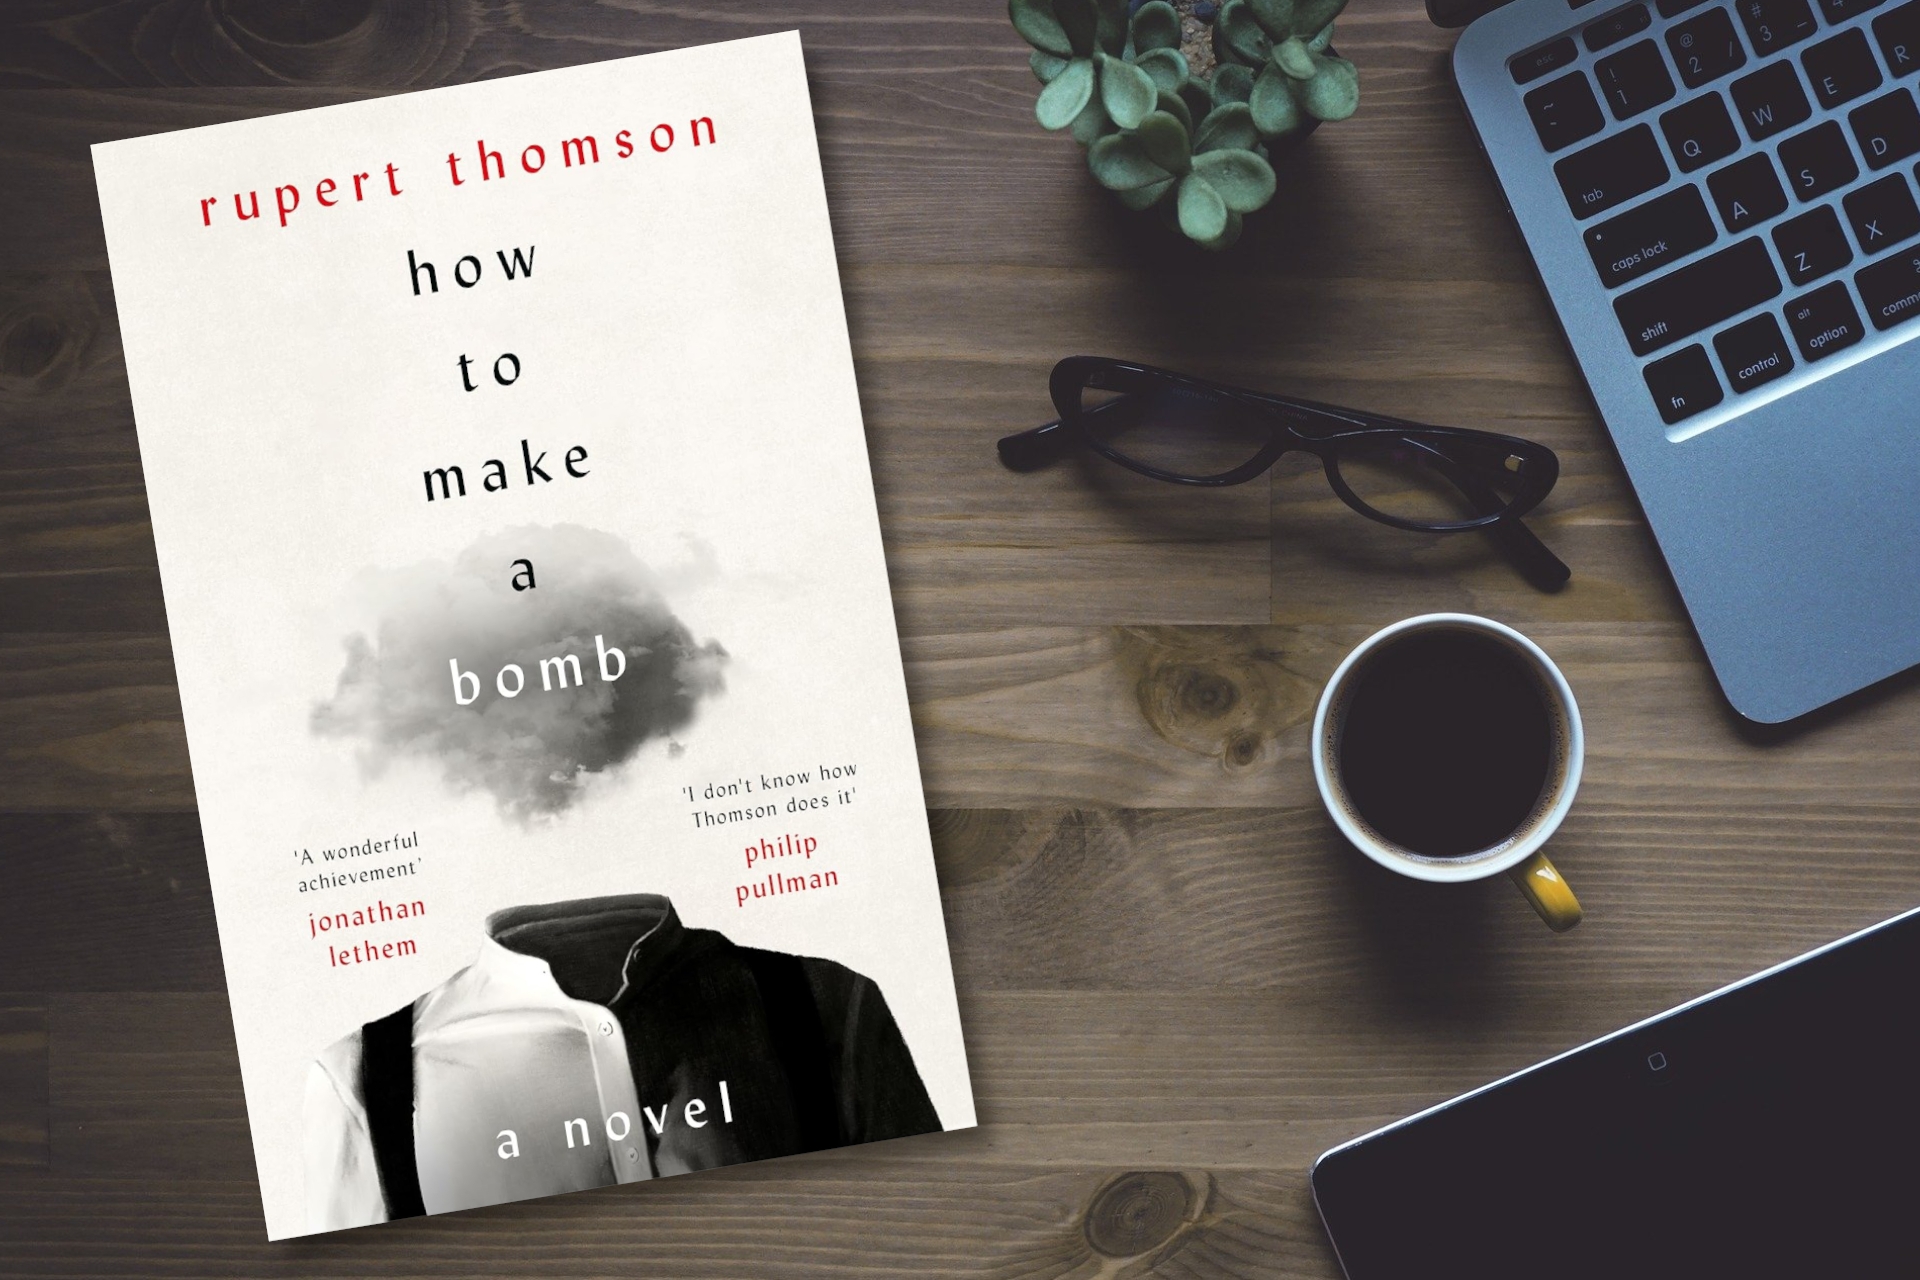 Author Q&A: Discover the extraordinary How To Make A Bomb by Rupert Thomson